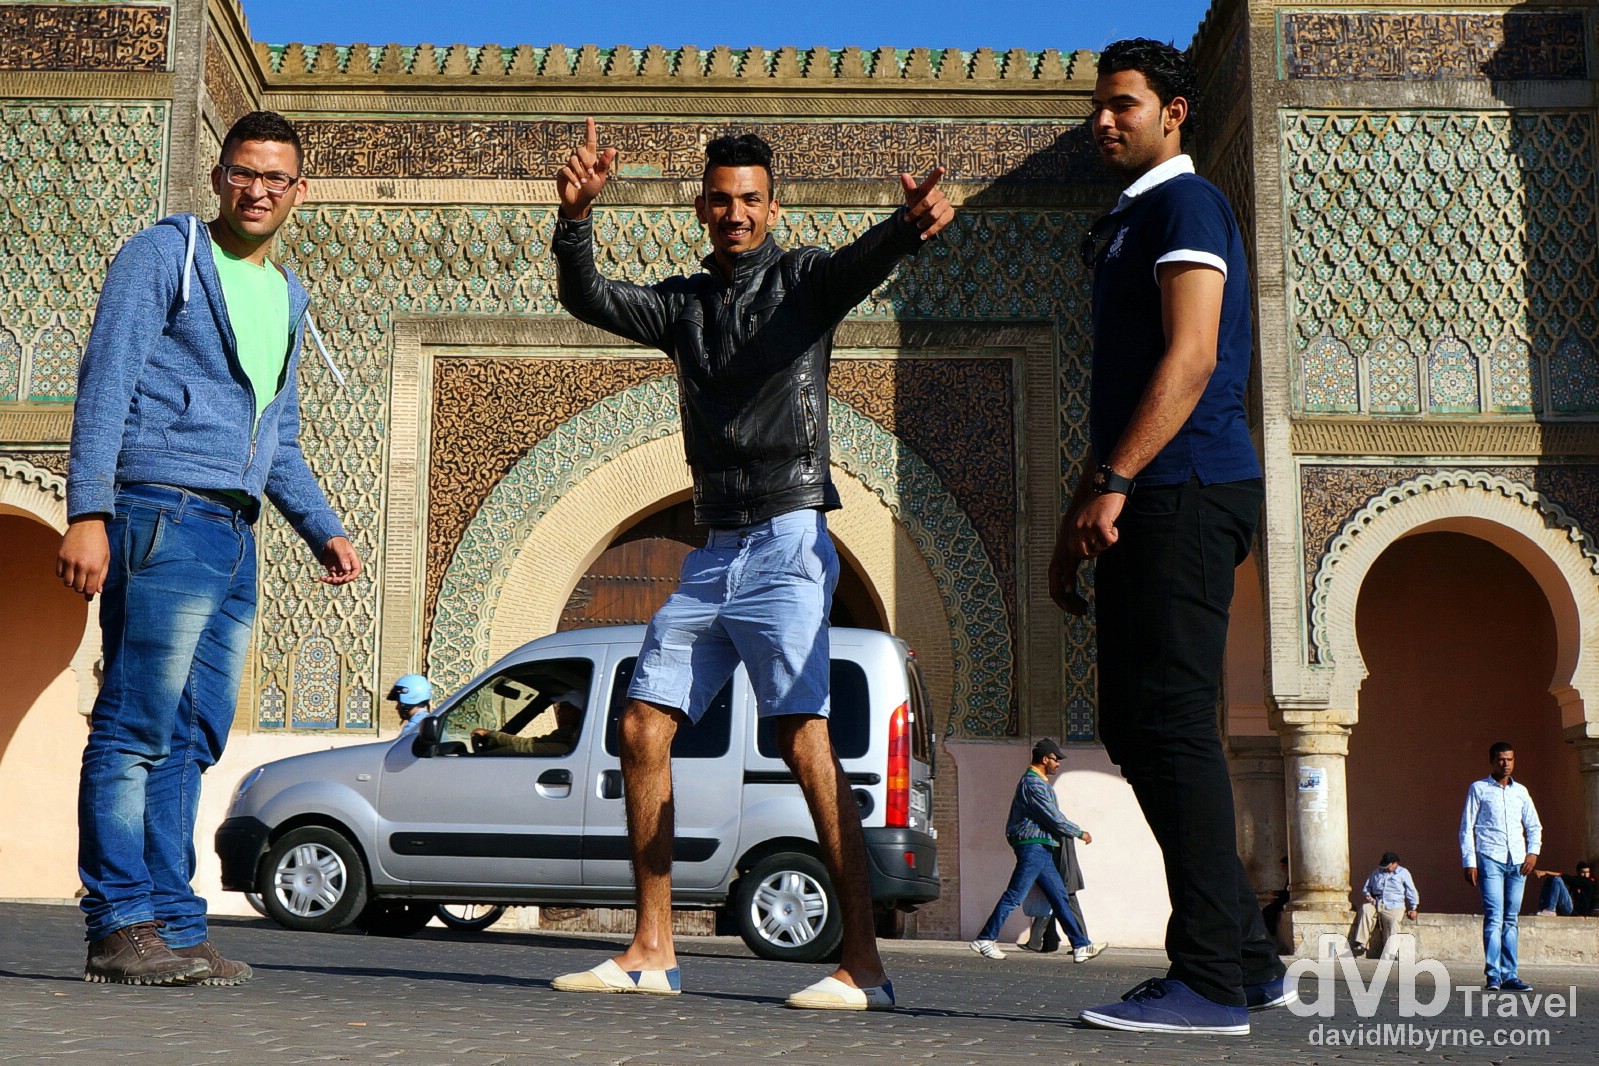 Photobomb in front of the gateway Bob Mansour in Meknes, Morocco. May 23rd, 2014.